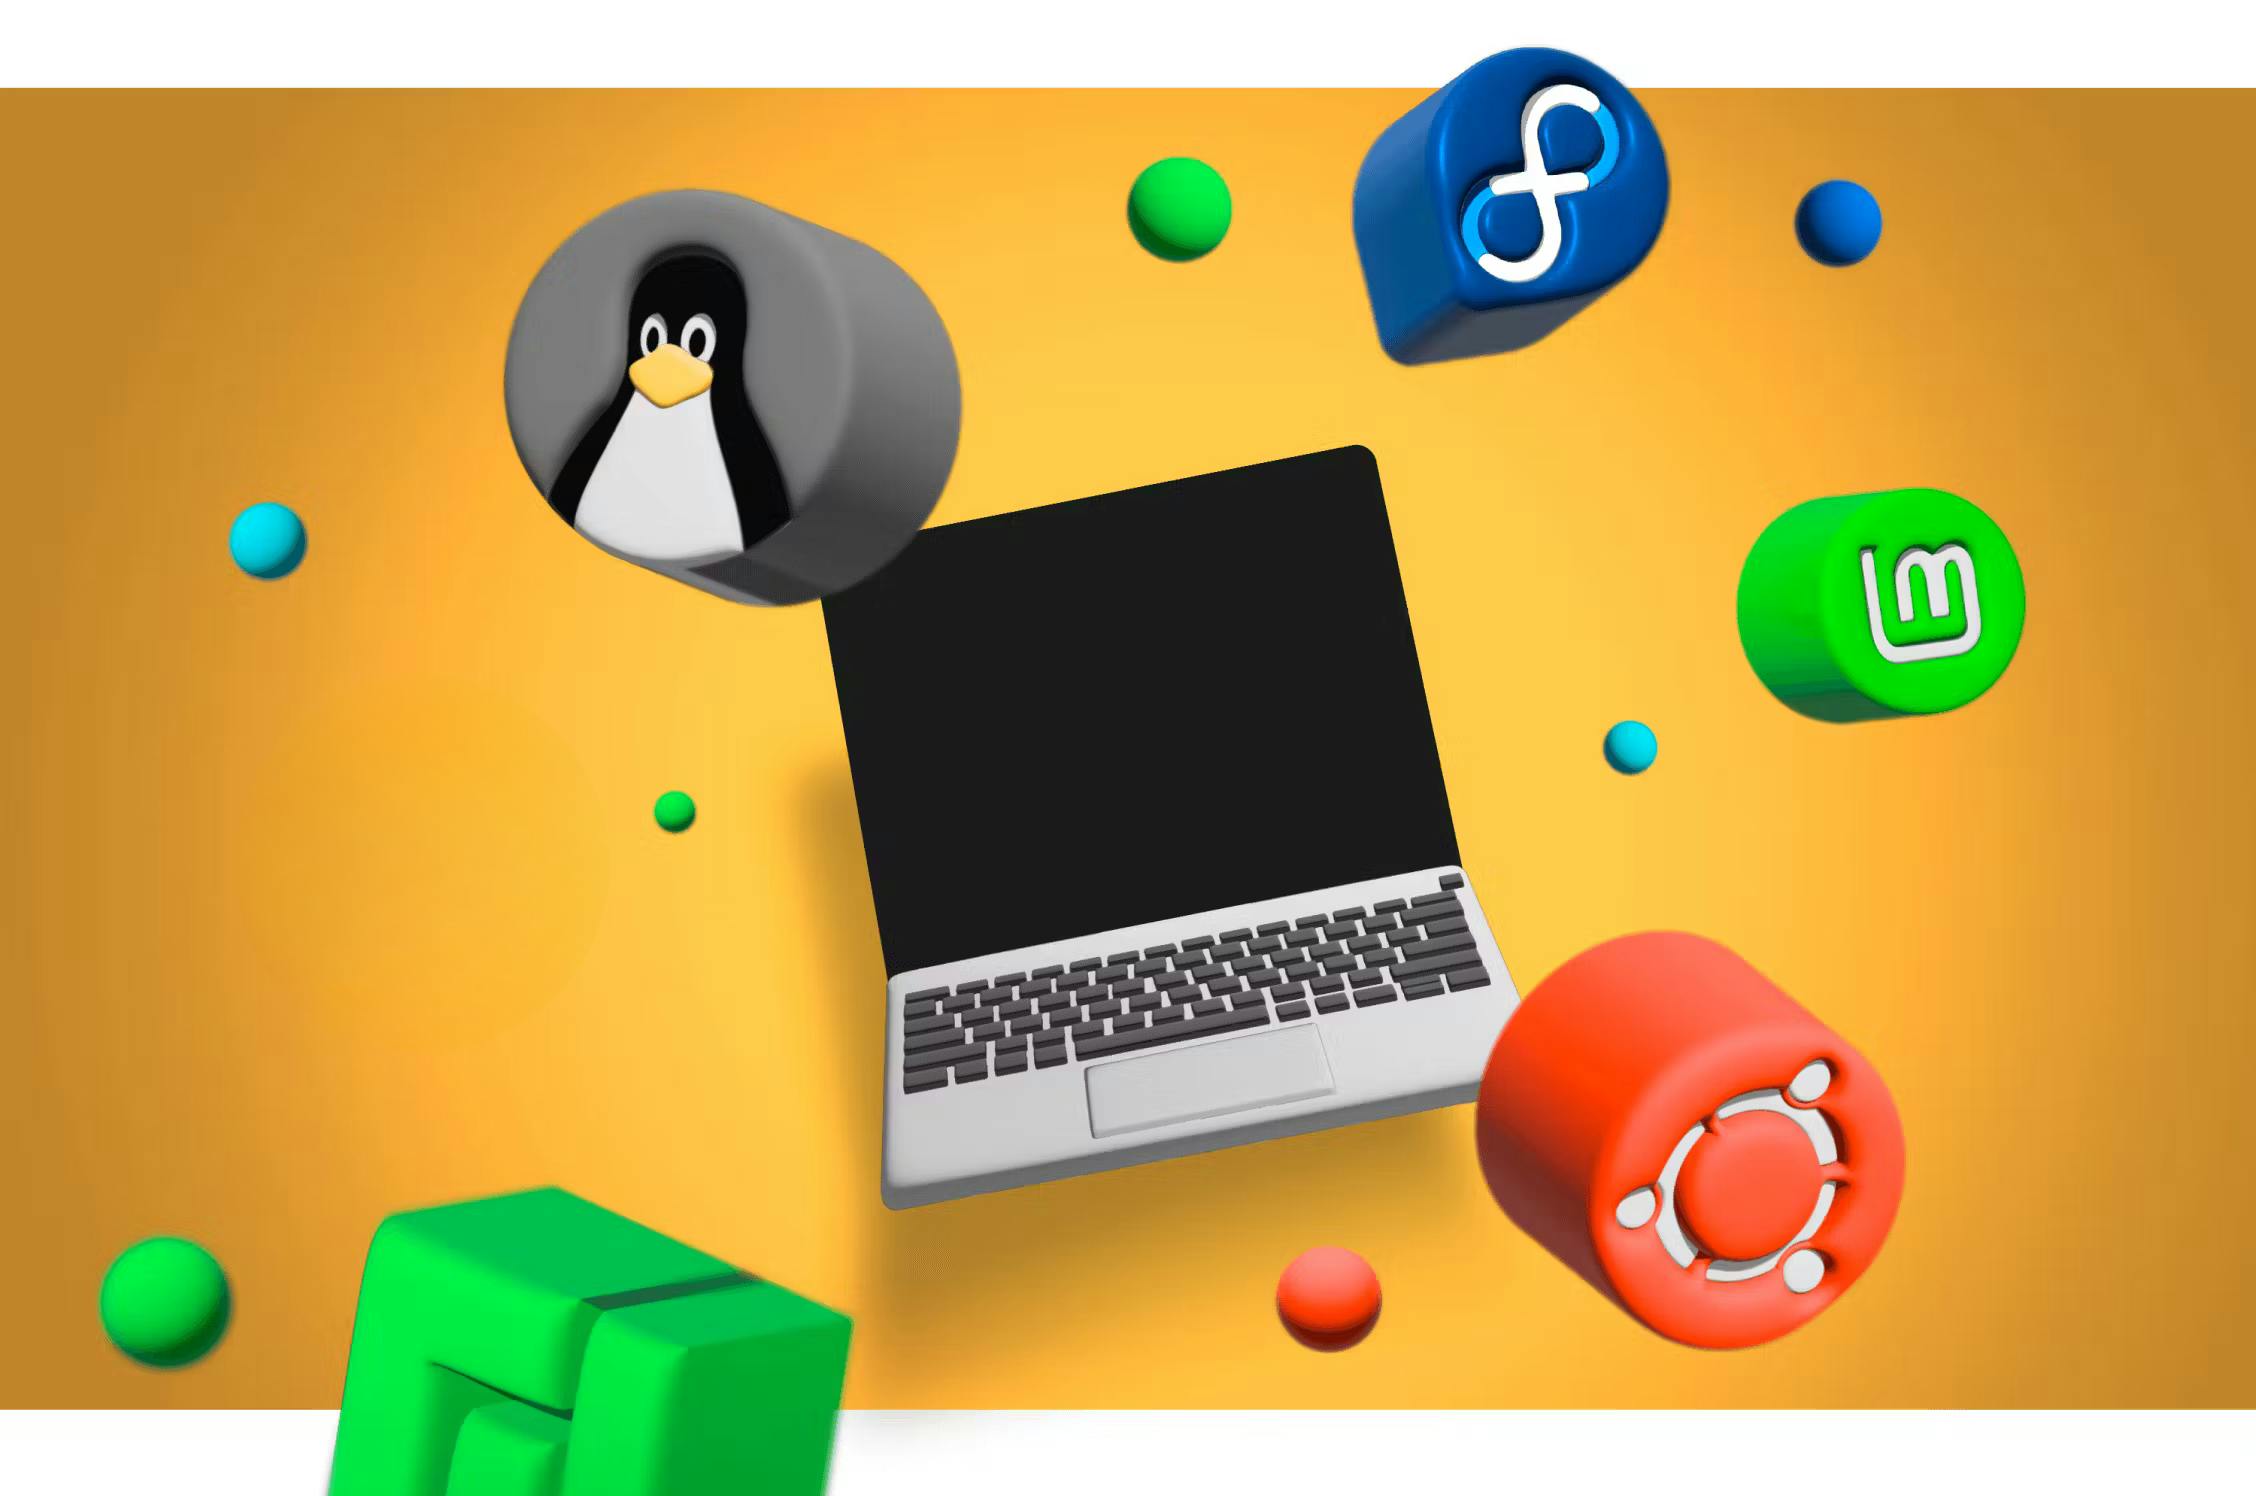 A Framework Laptop surrounded by Linux distributions logos